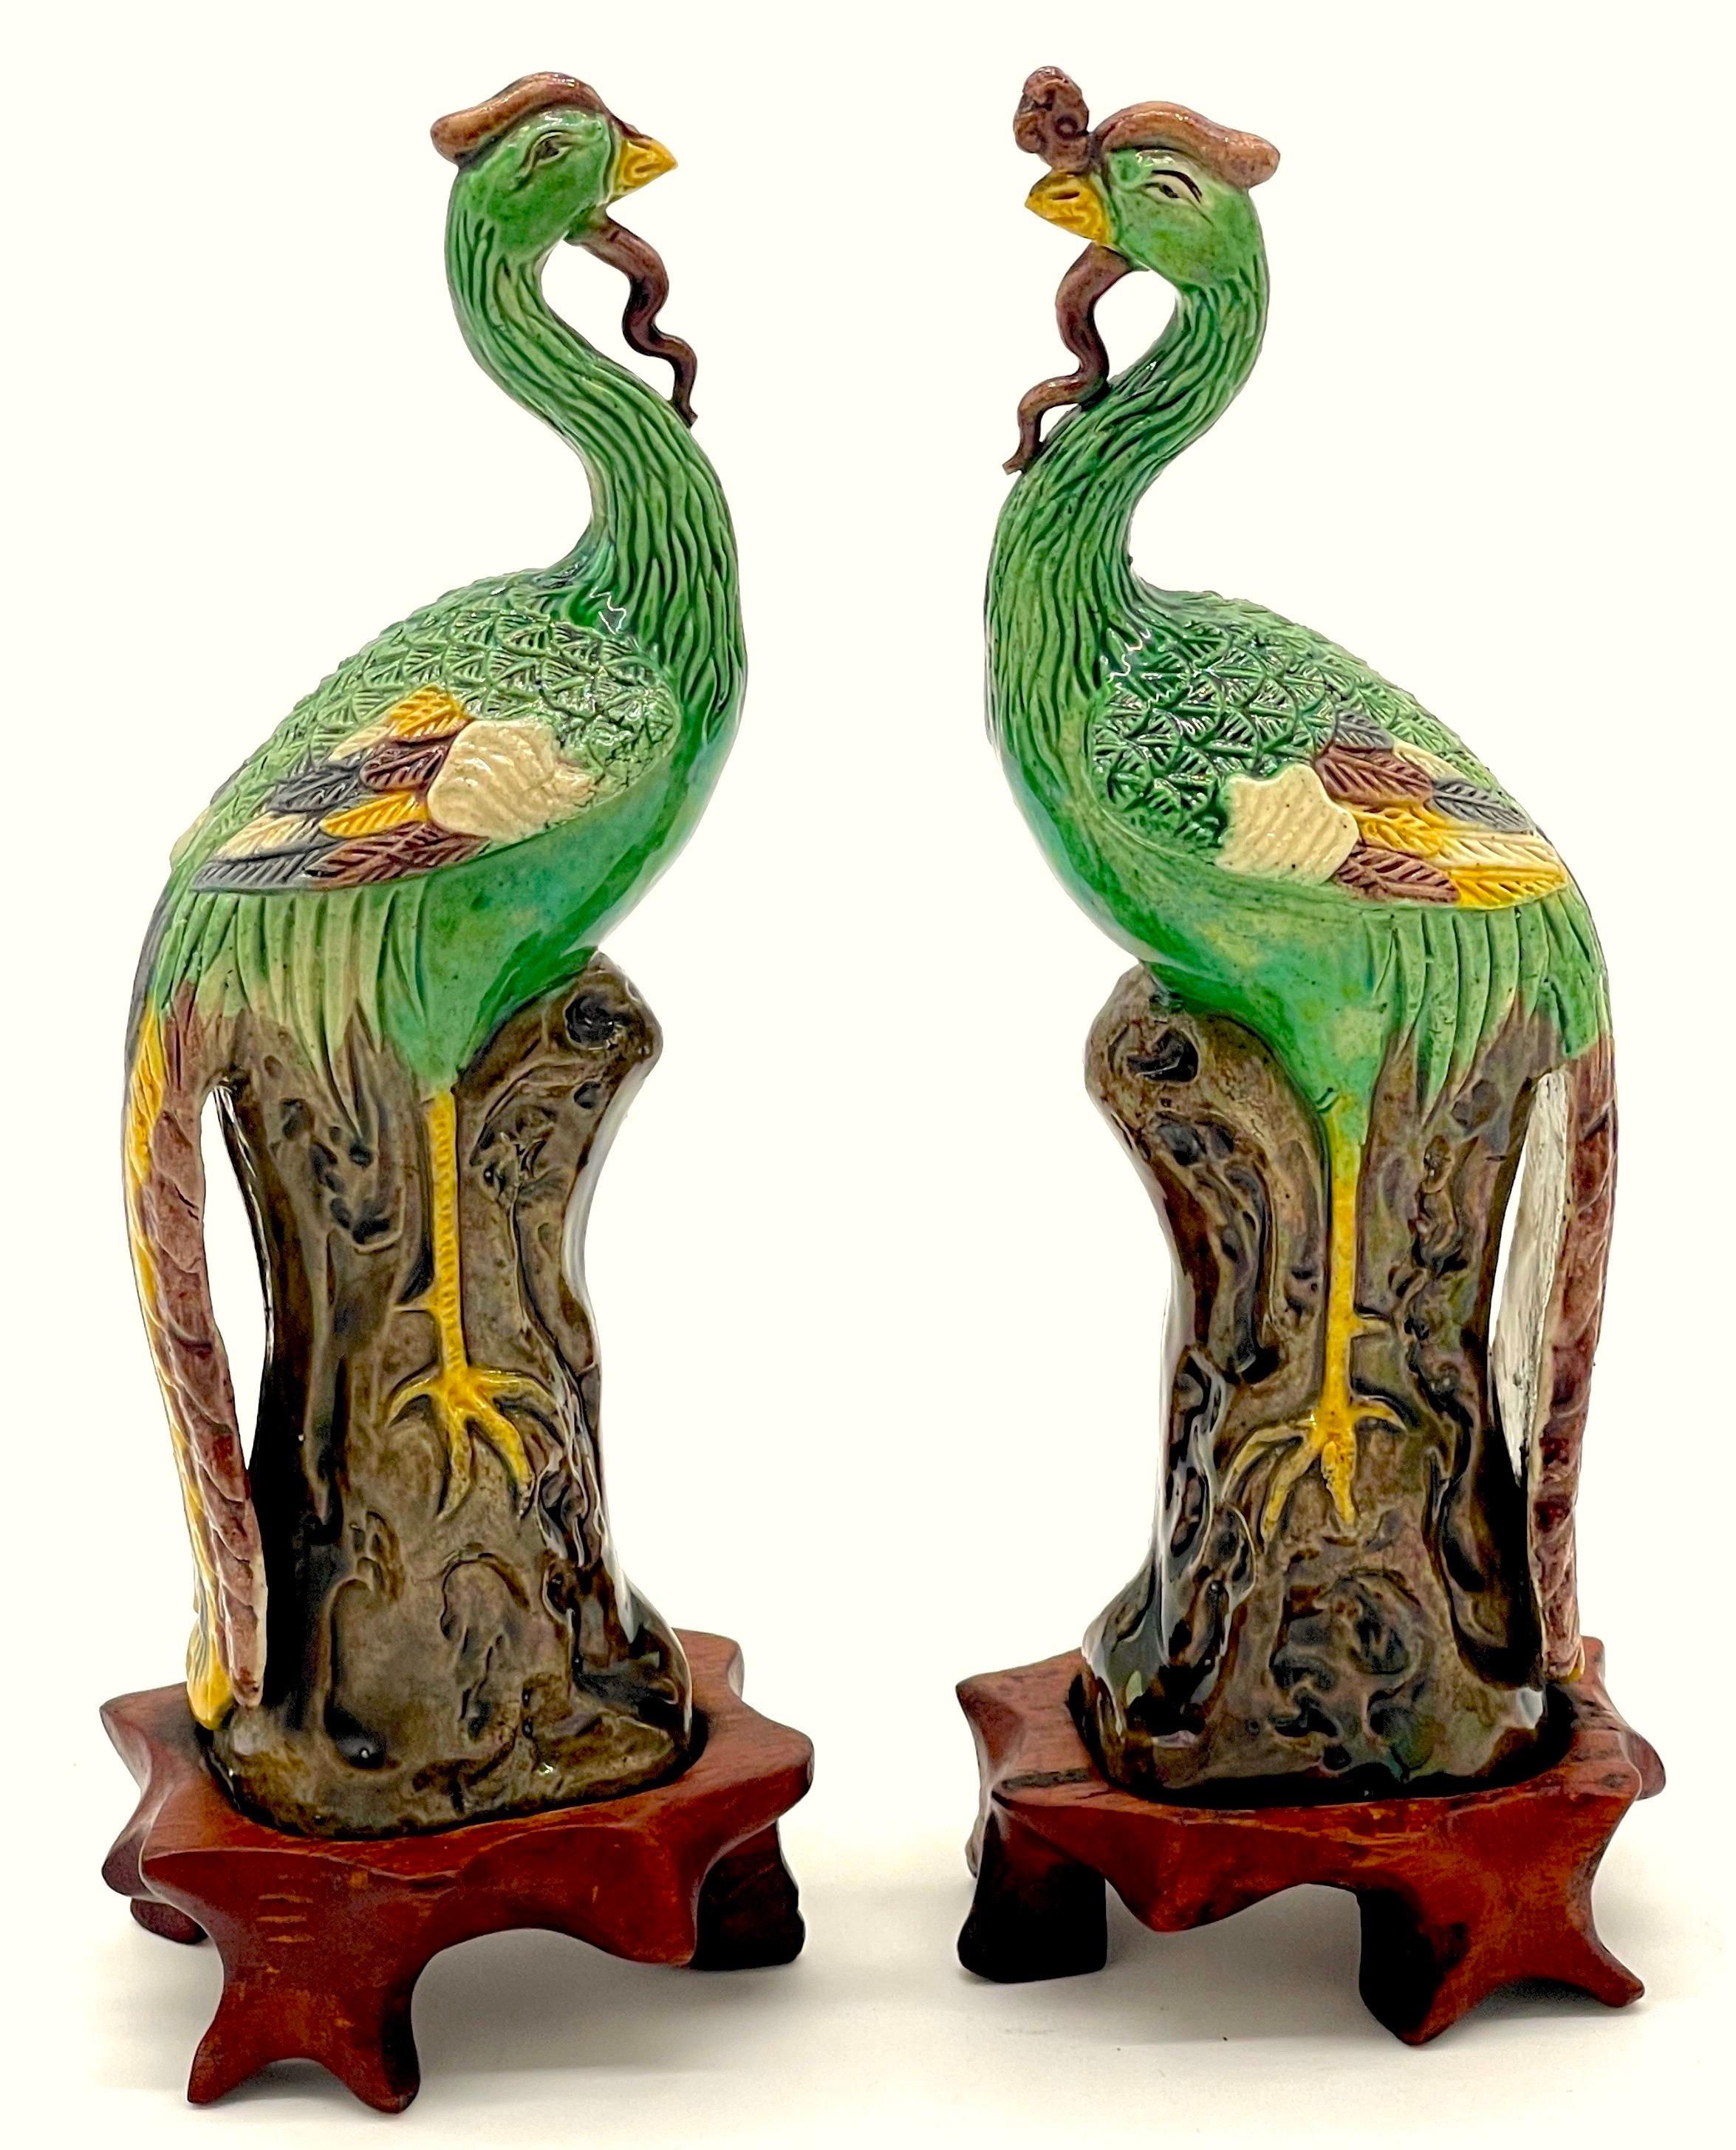 A Diminutive Pair of Chinese Sancai Glazed Phoenix Birds, on Hardwood Stands 
China, 20th Century 
 
A Diminutive pair of Chinese sancai glazed phoenix birds, well presented on carved hardwood stands. These exquisite Fenghuang (Phoenix) bird figures